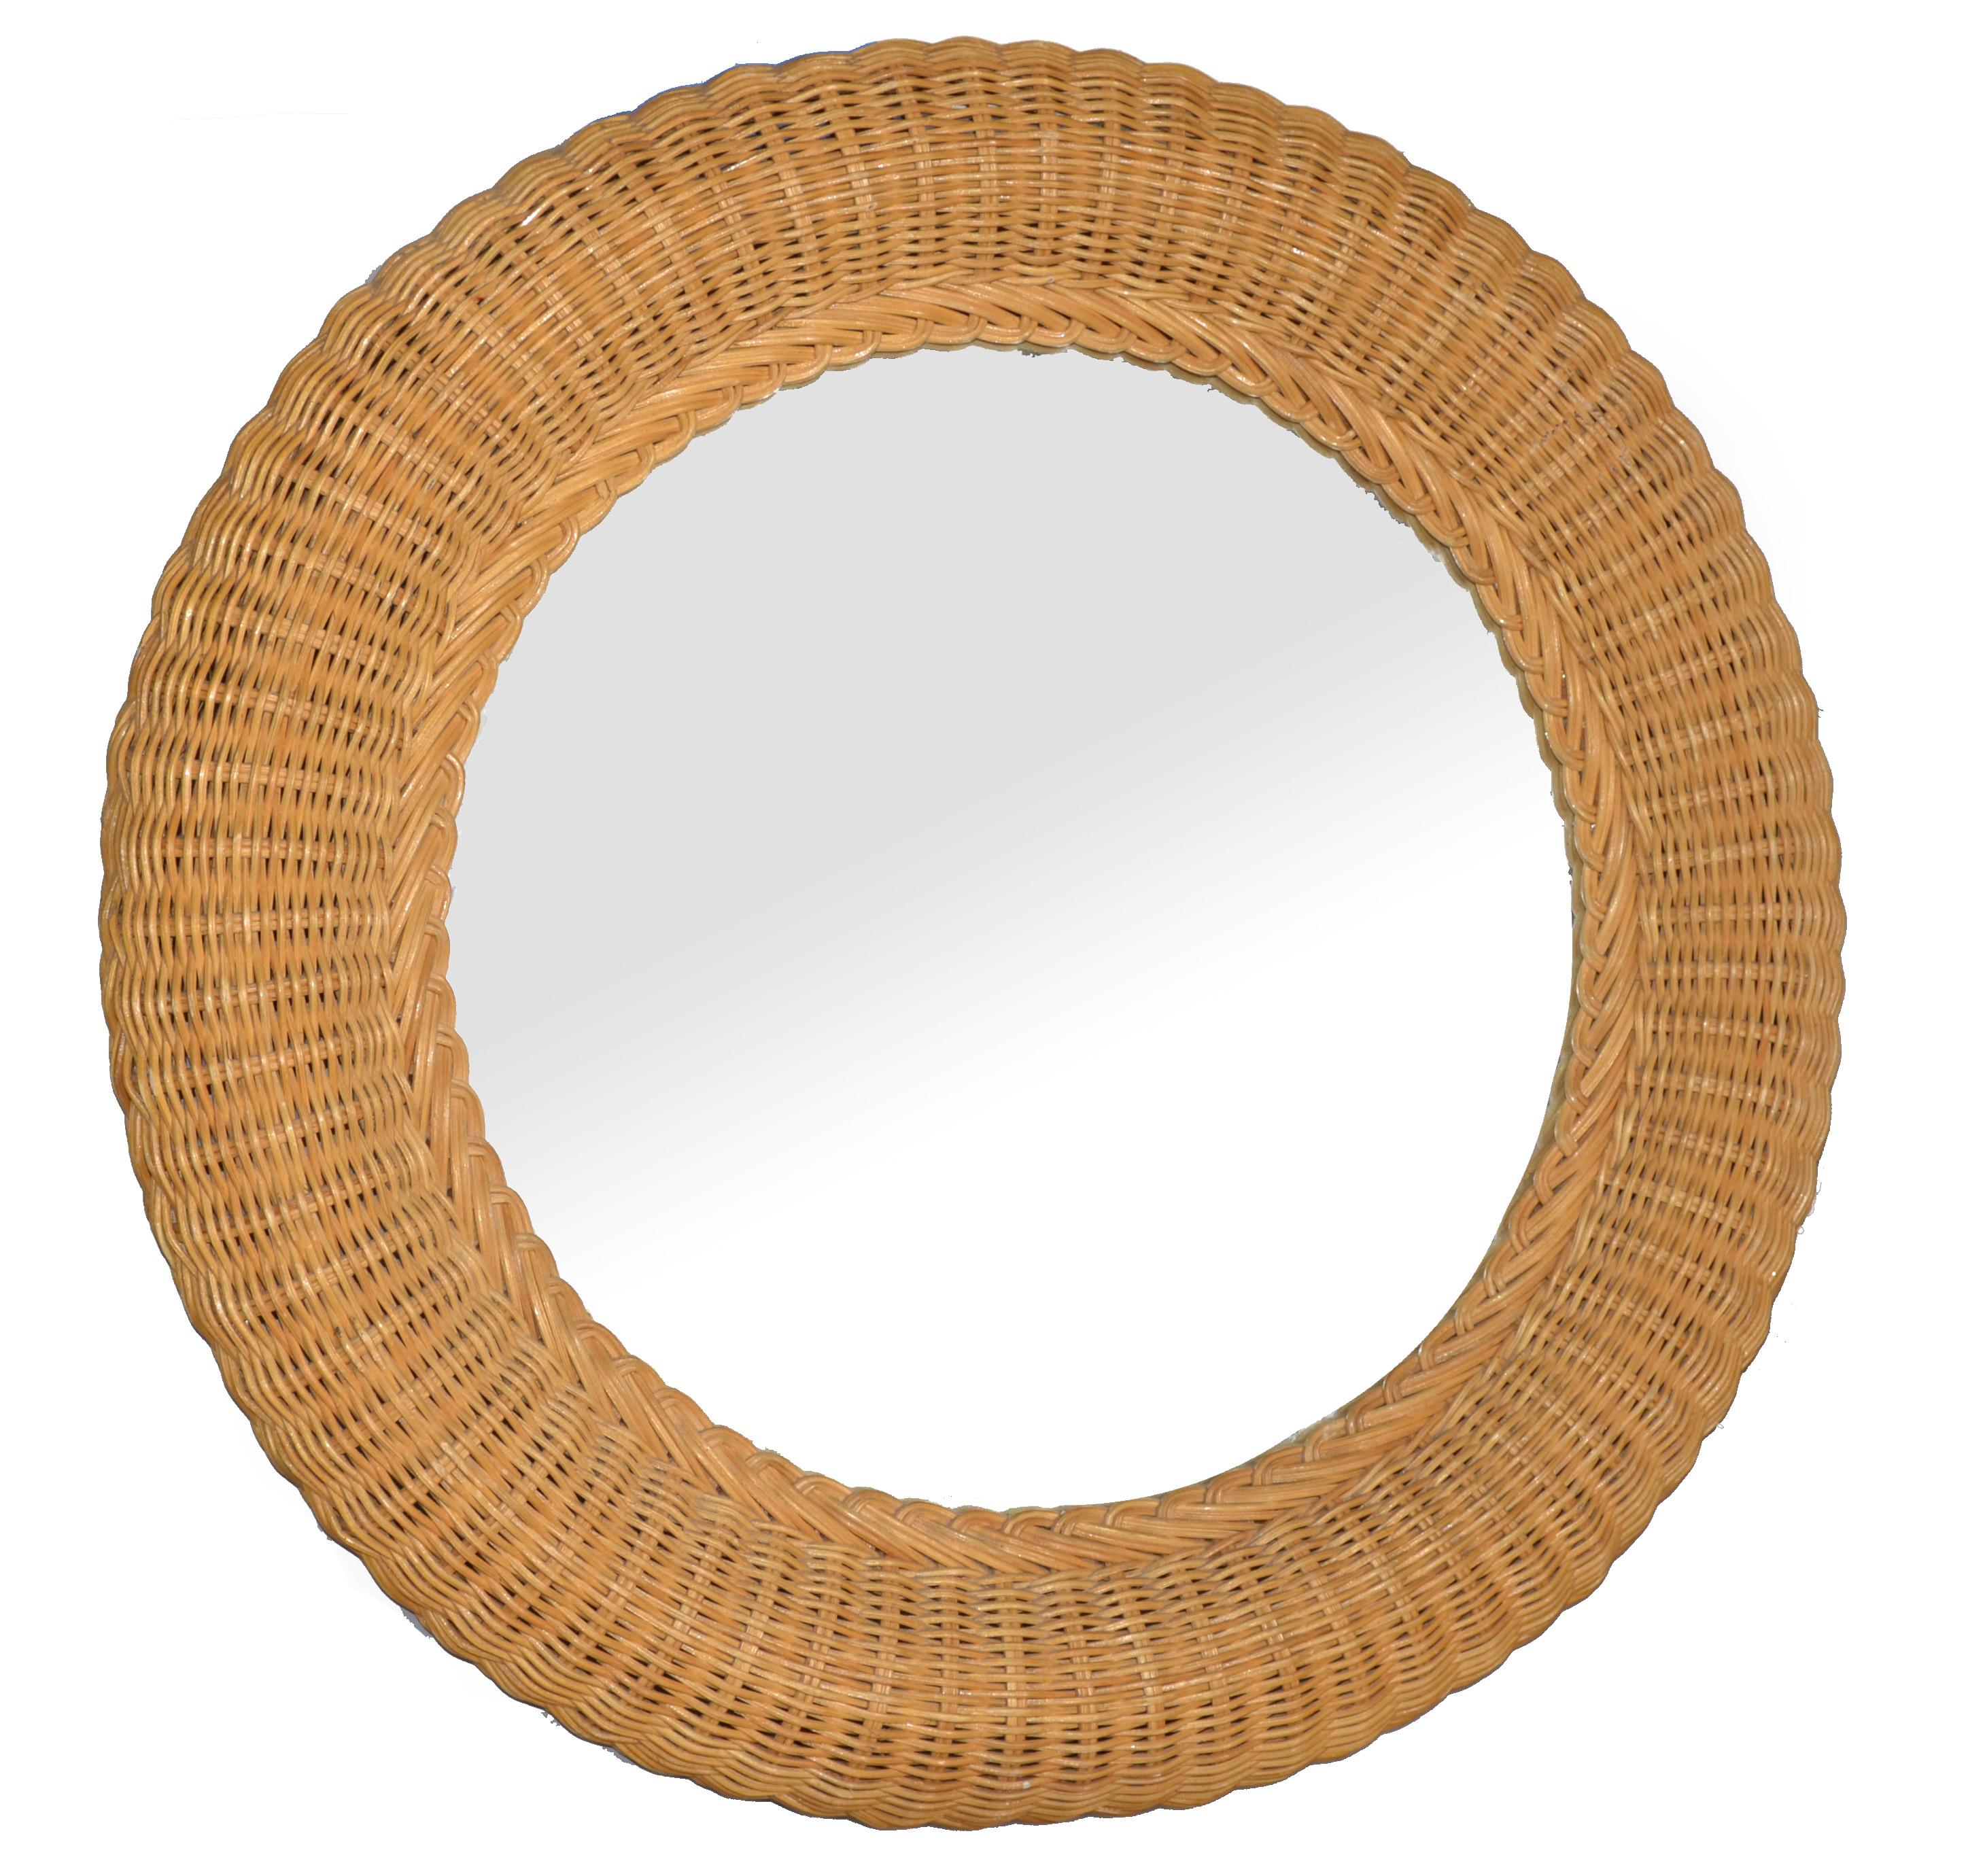 French Coastal Mid-Century Modern Bohemian chic round shaped handwoven pencil reed and wicker wall mirror.
Exemplary construction bent pencil reed are firmly lined on a sturdy wooden backing.
Tropical Coastal Design for Your Sunroom.
Mirror Glass